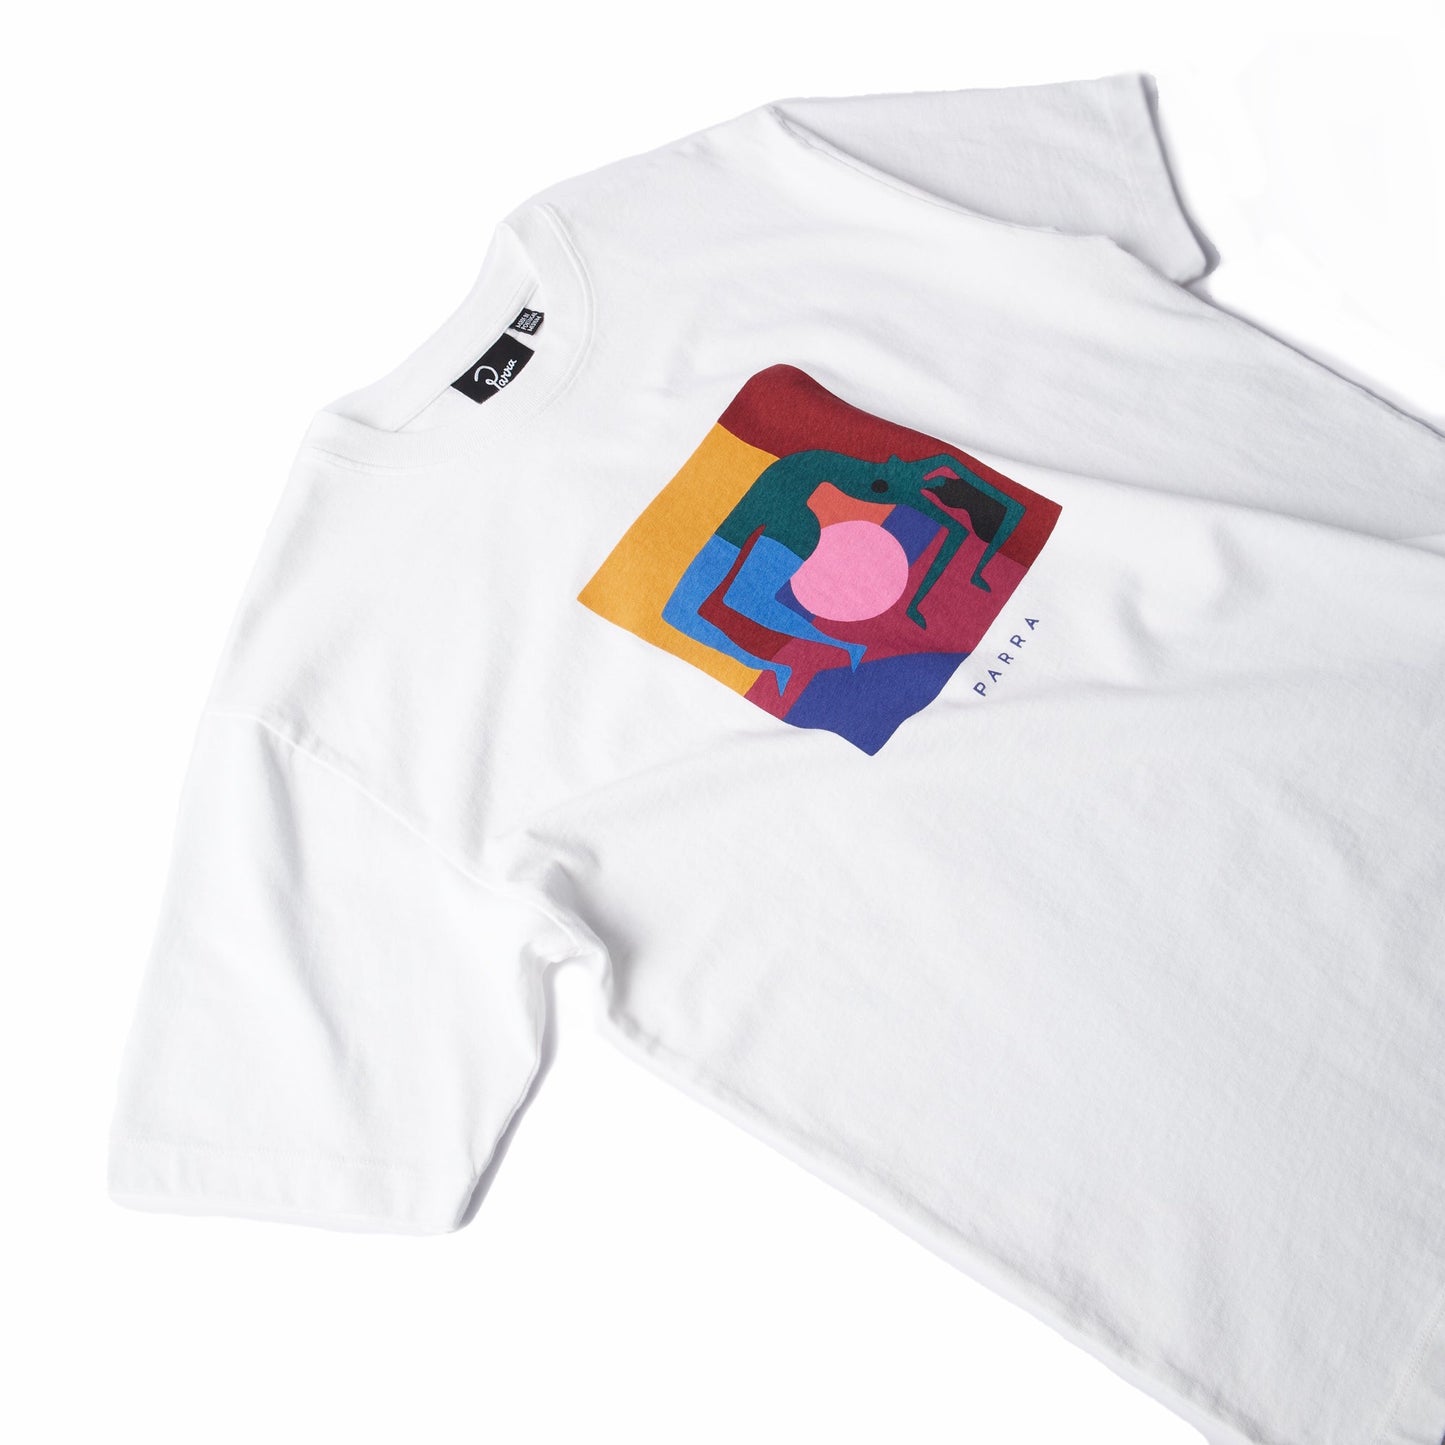 by Parra Yoga Balled t-shirt